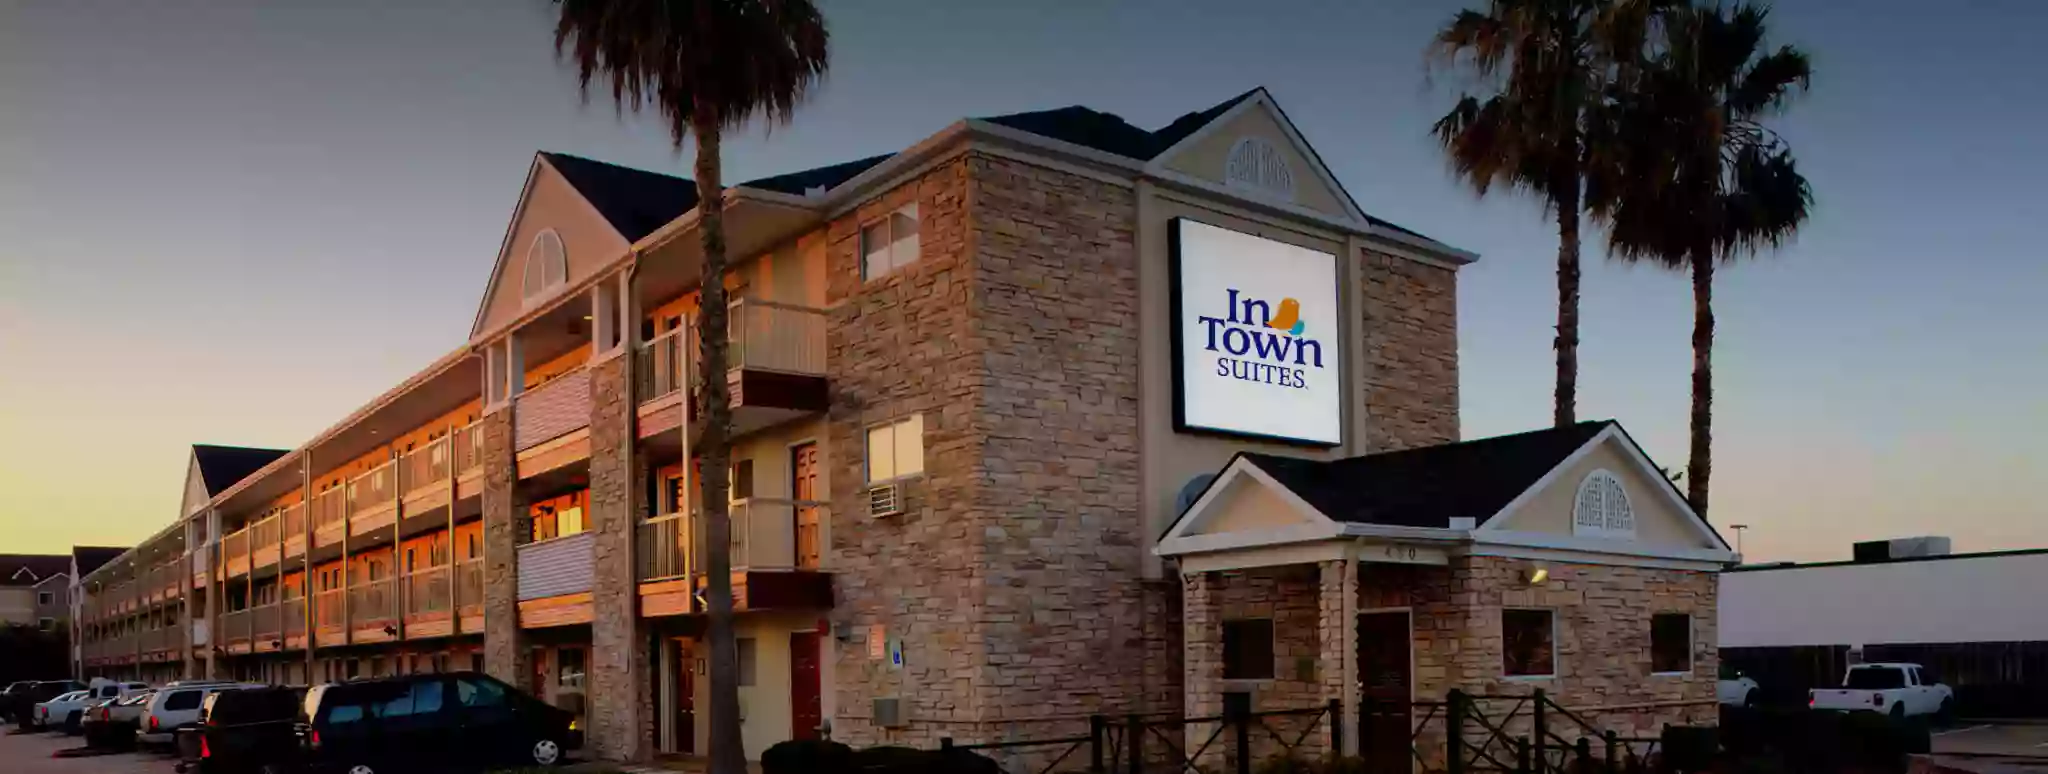 InTown Suites Extended Stay Houston TX - West